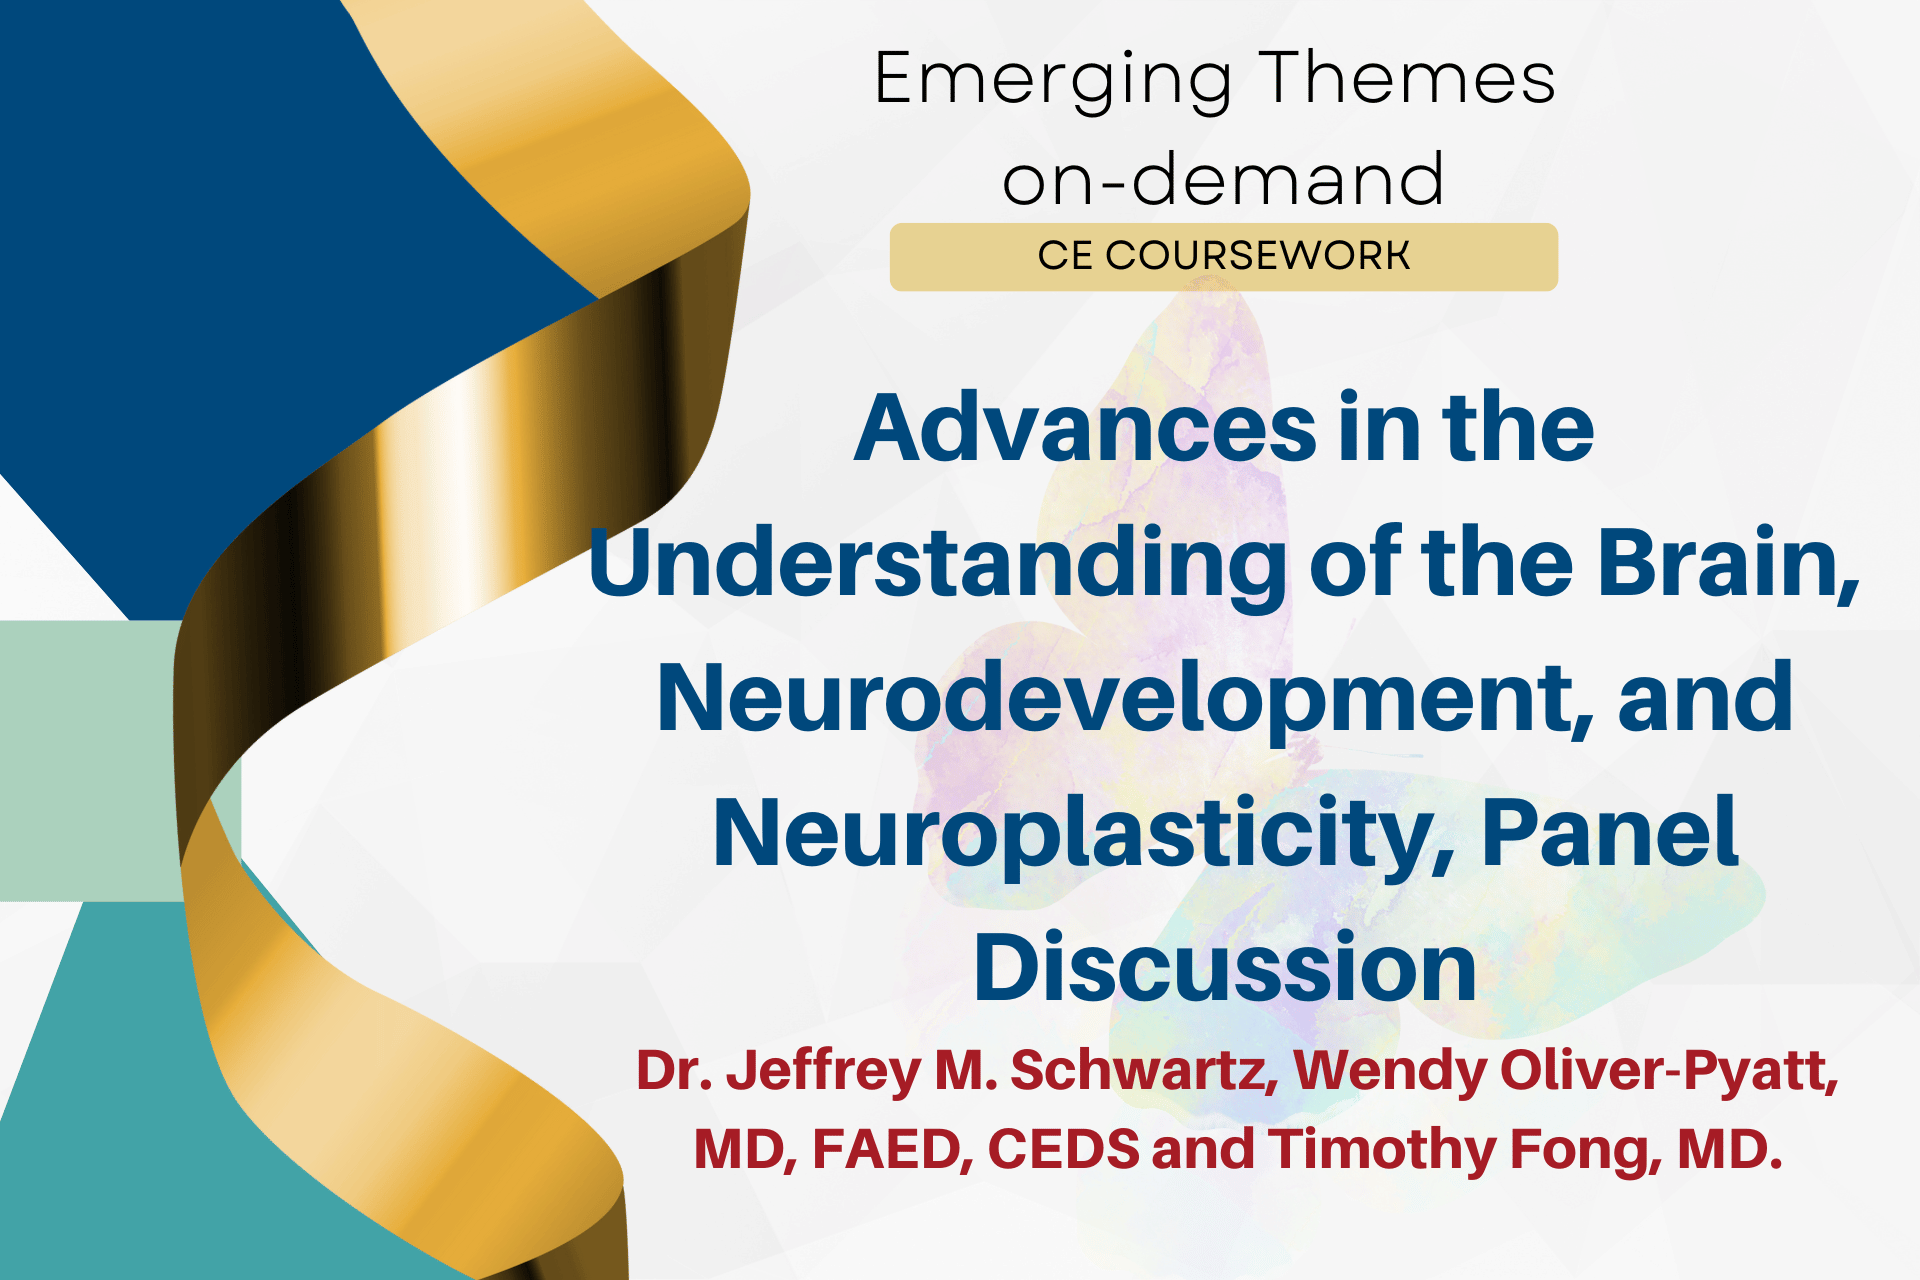 Advances in the Understanding of the Brain, Neurodevelopment, and Neuroplasticity Panel Discussion